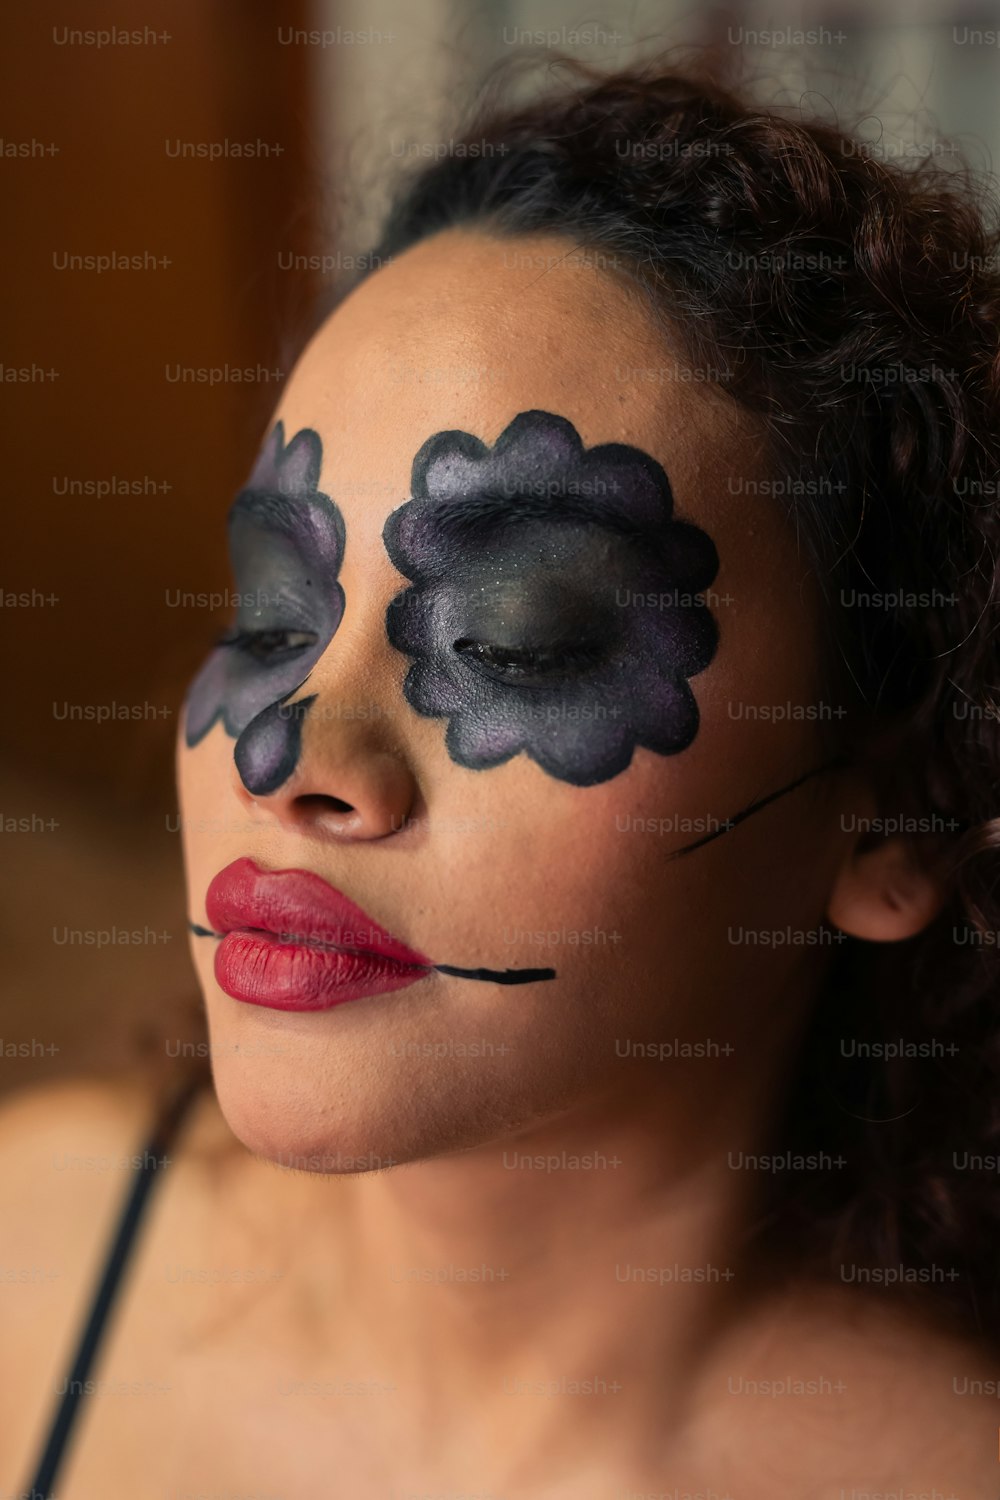 a woman with makeup painted to look like clouds